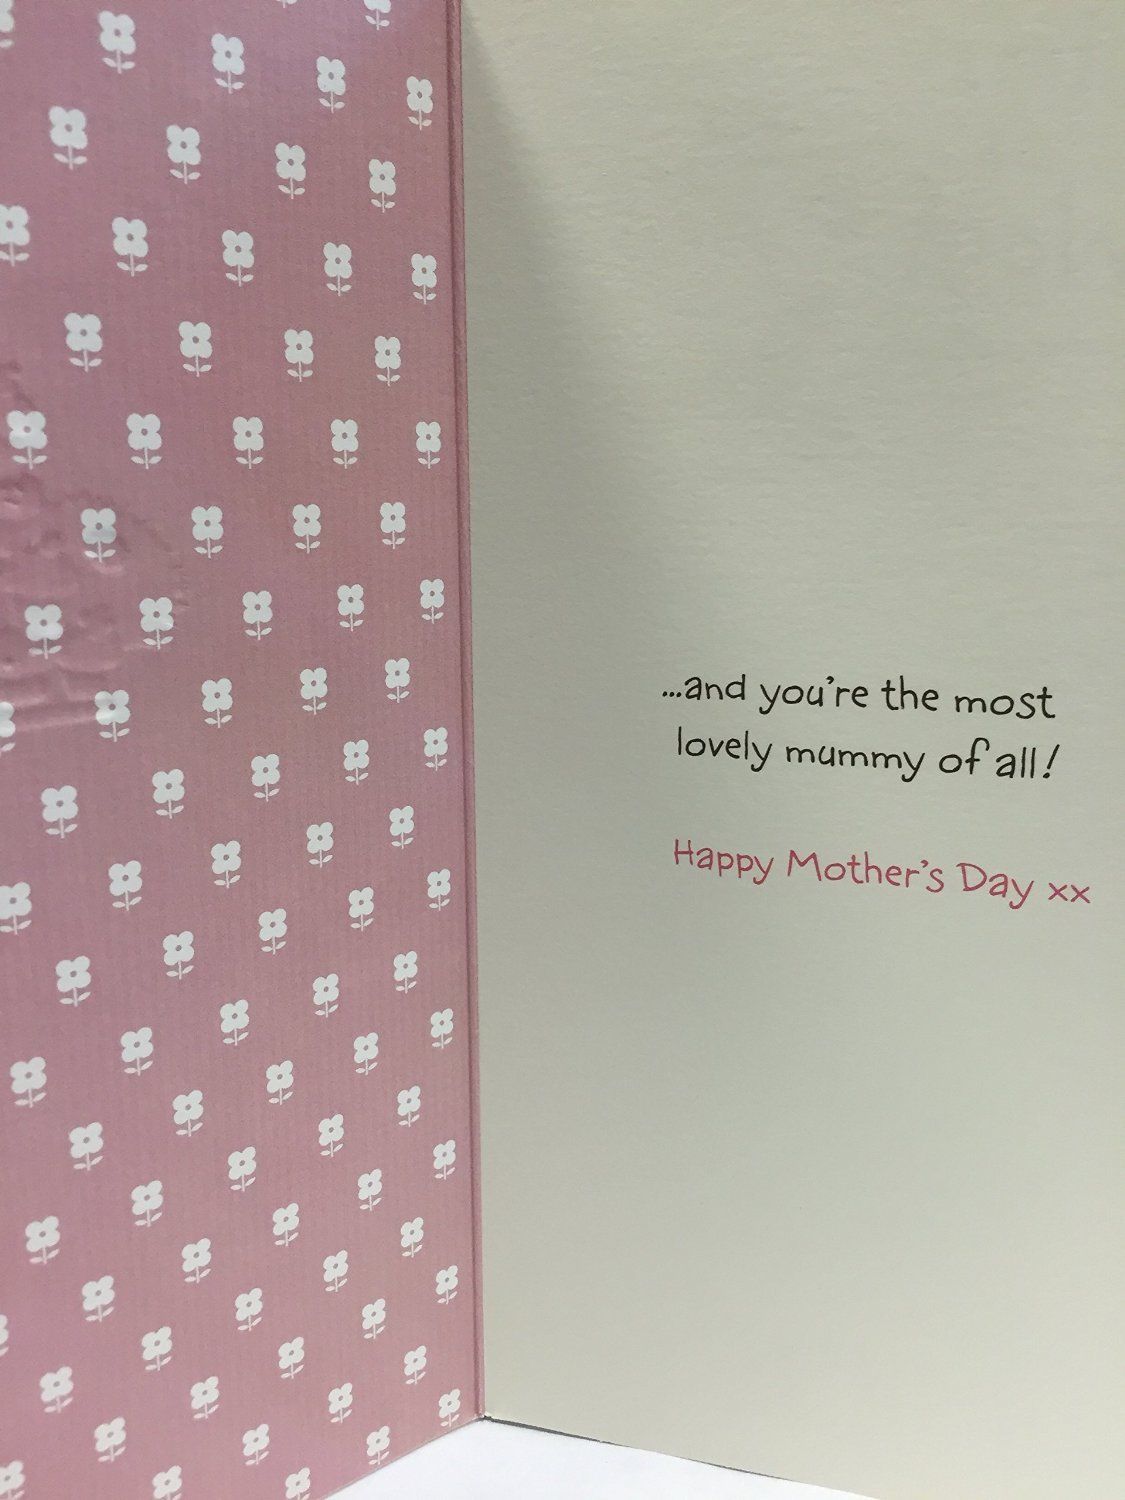 For the Best Mummy a Daughter Could Have! Happy Mother's Day Card